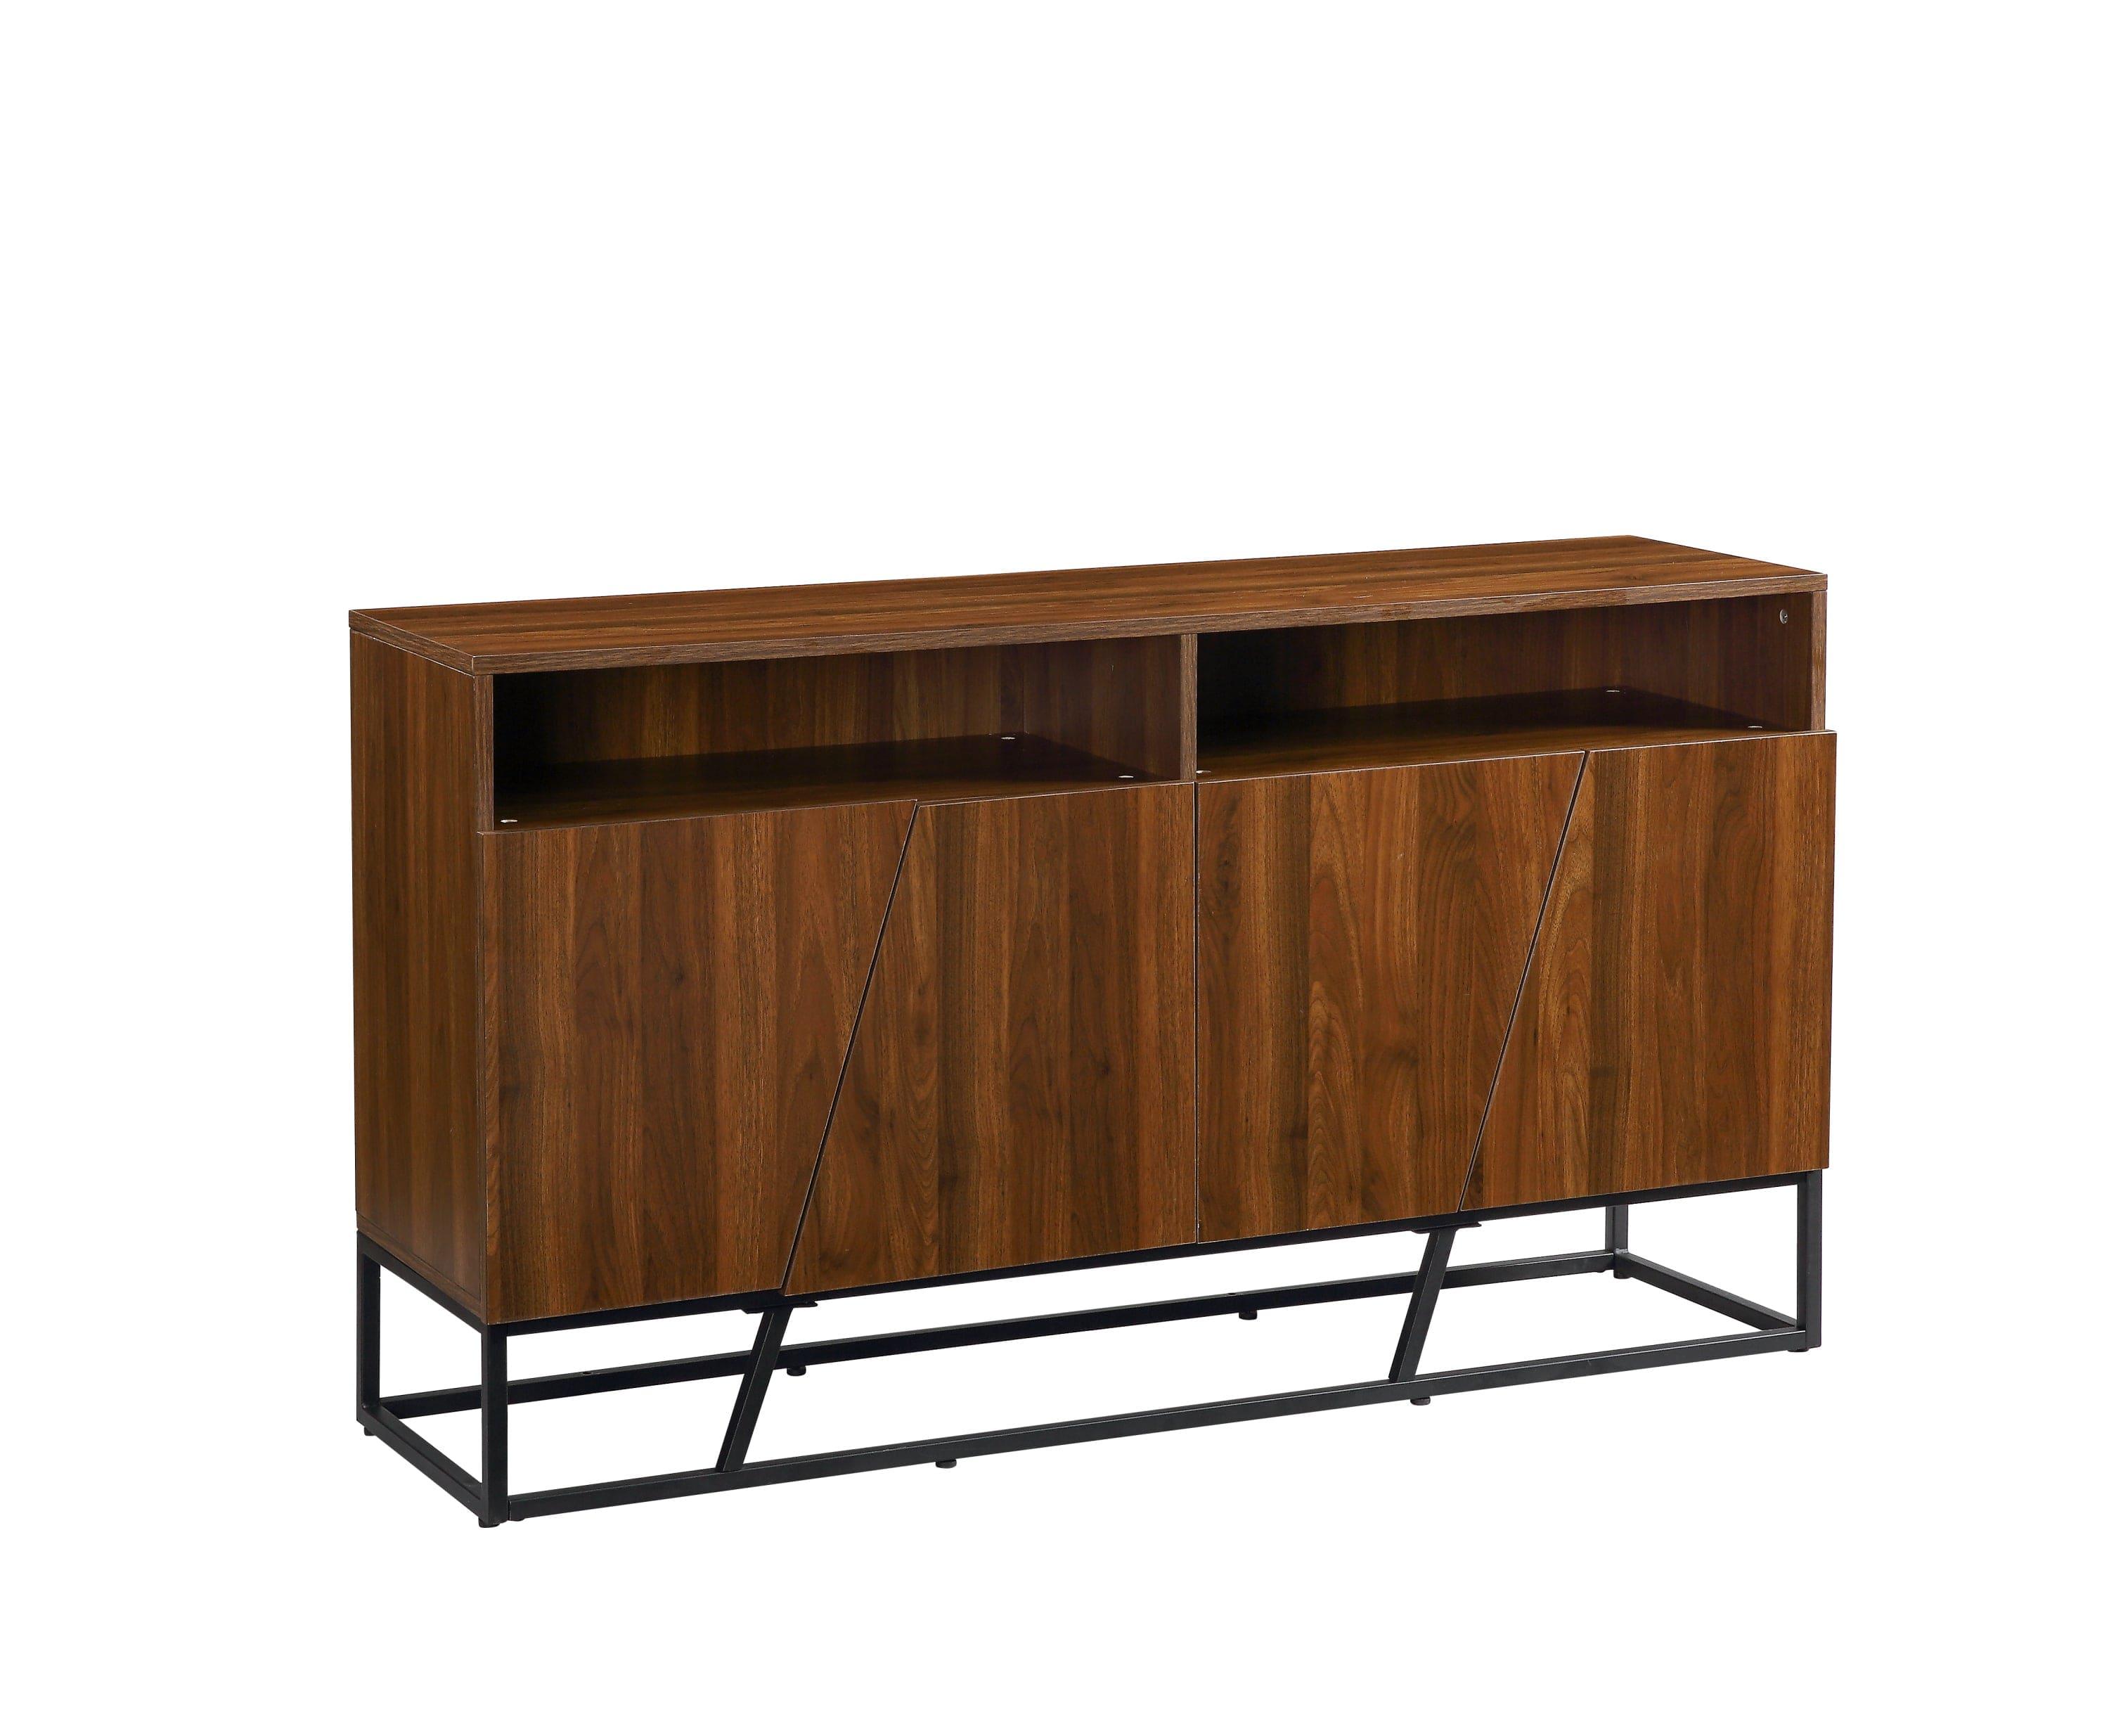 Shop ACME Walden Console Table in Walnut Finish AC00795 Mademoiselle Home Decor